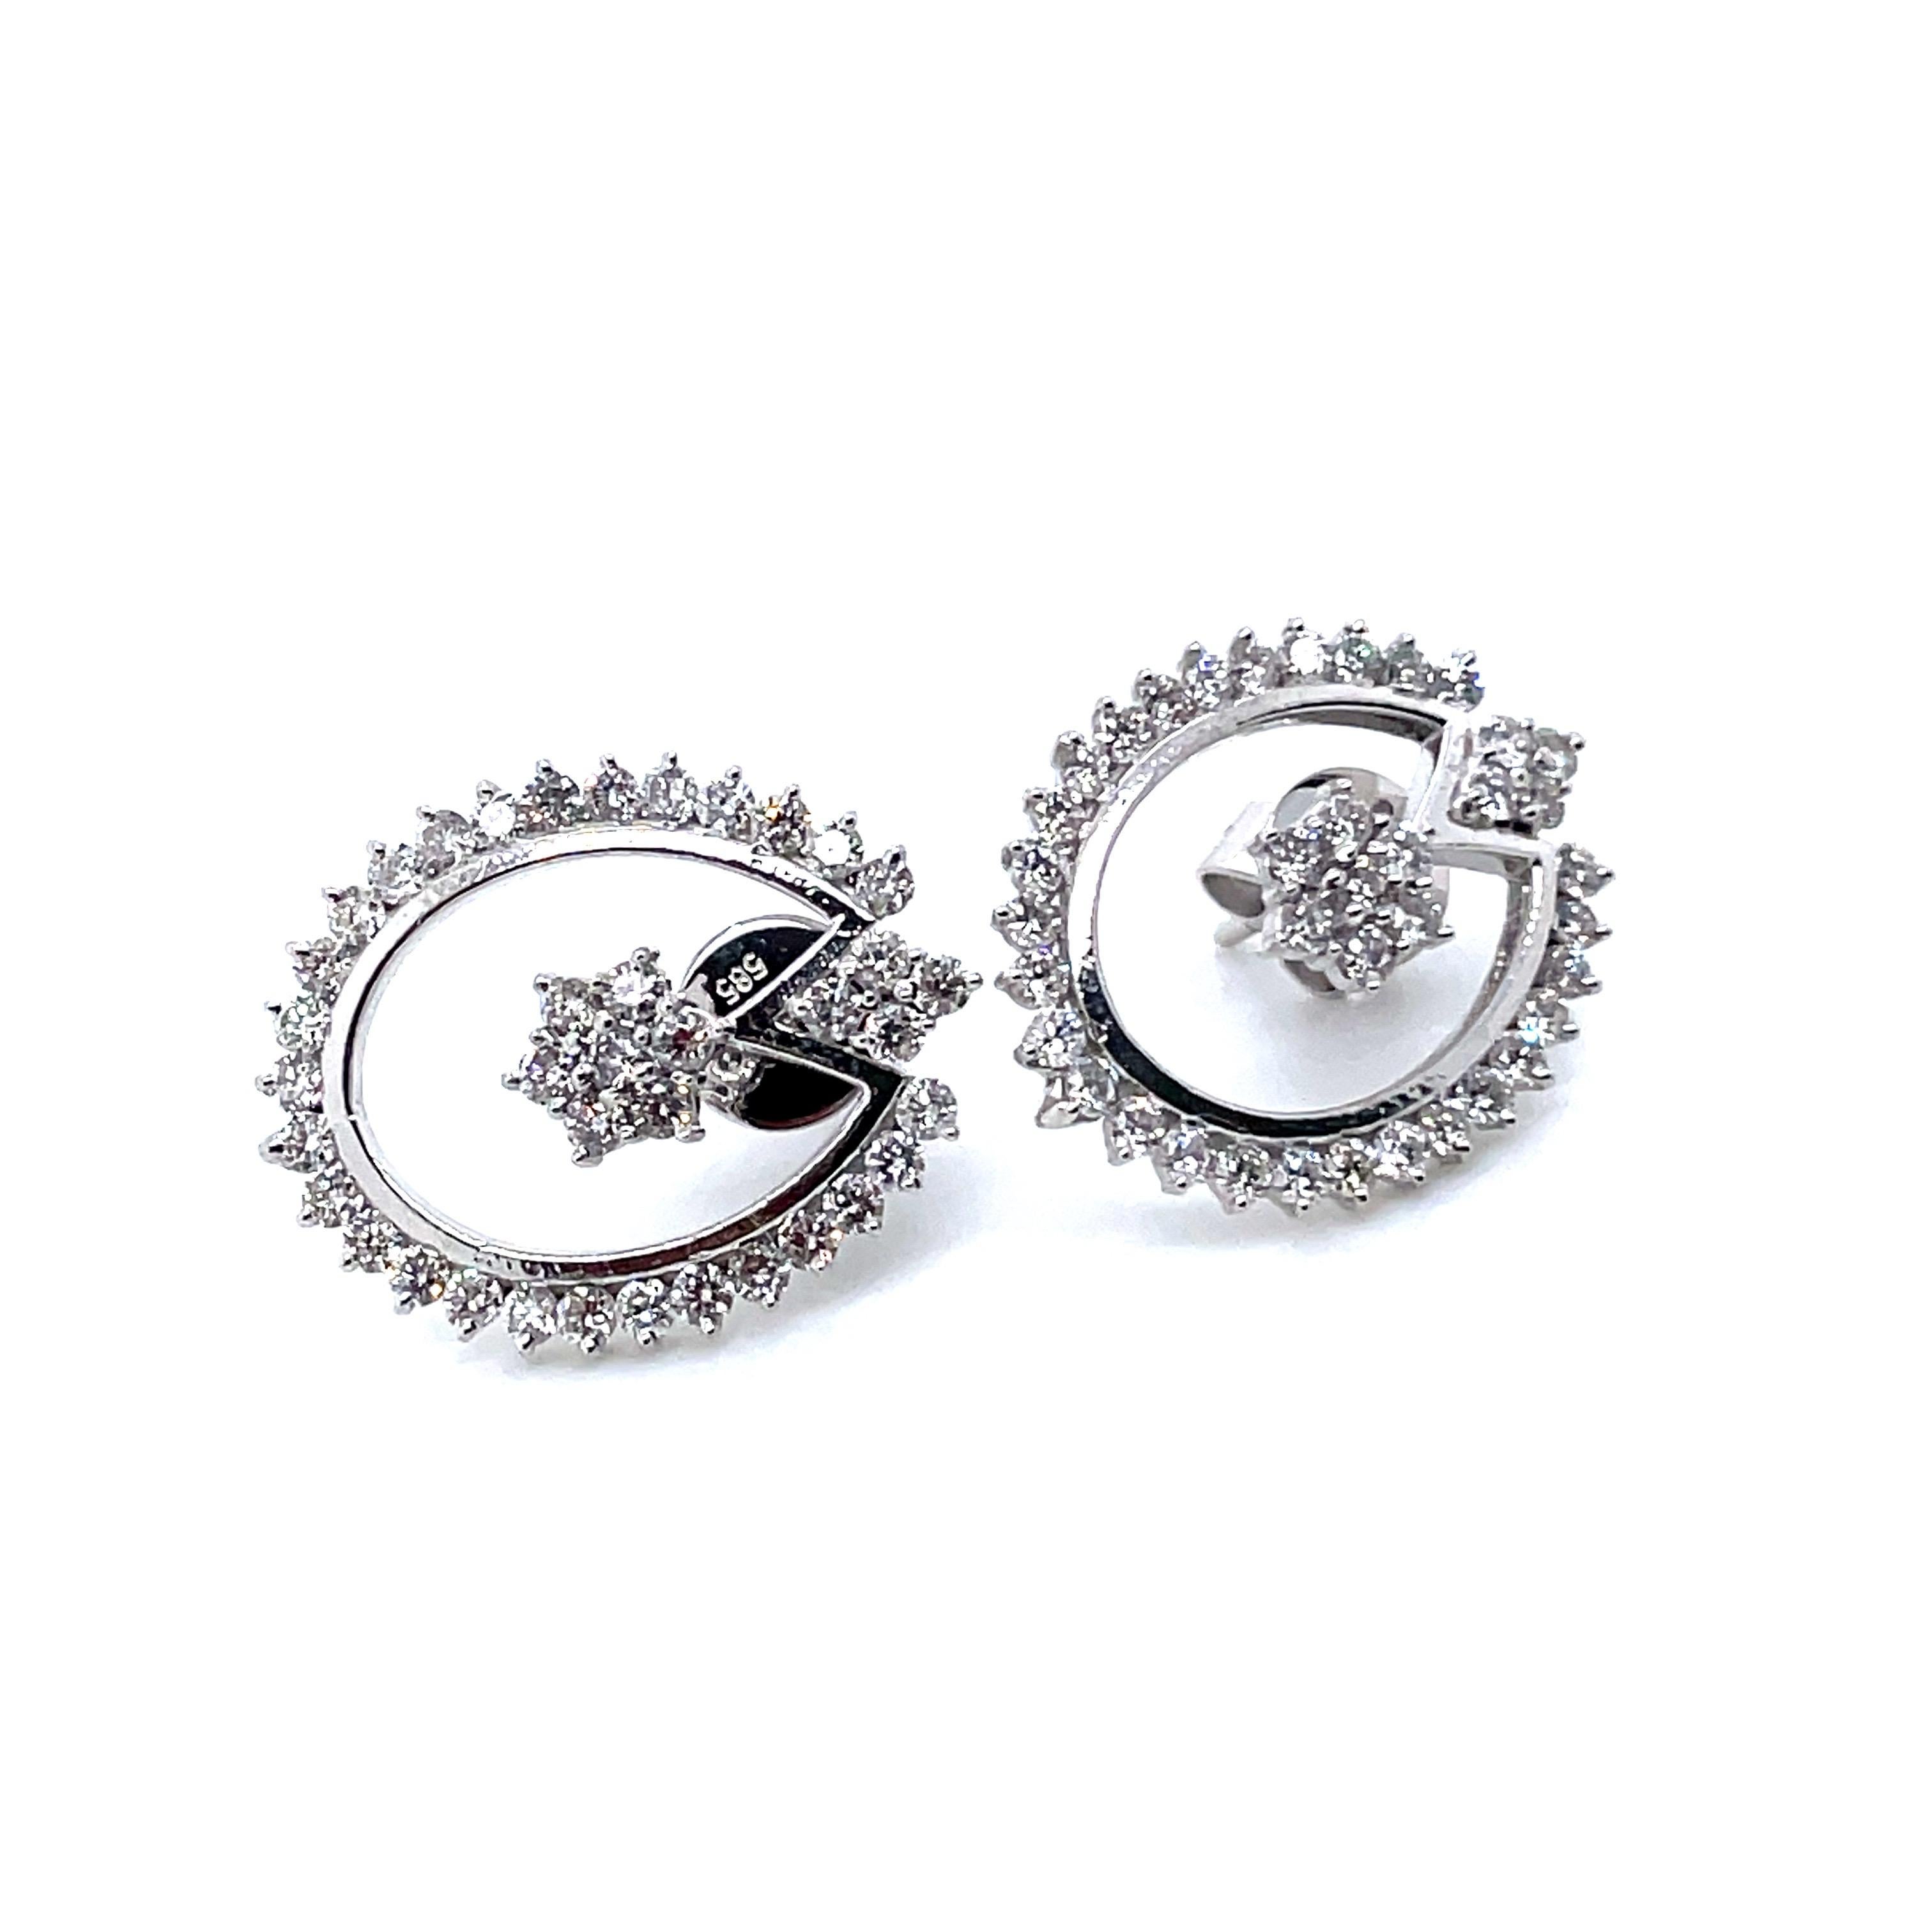 Contemporary 14k White Gold Diamond Earrings With Tulip Pattern For Sale